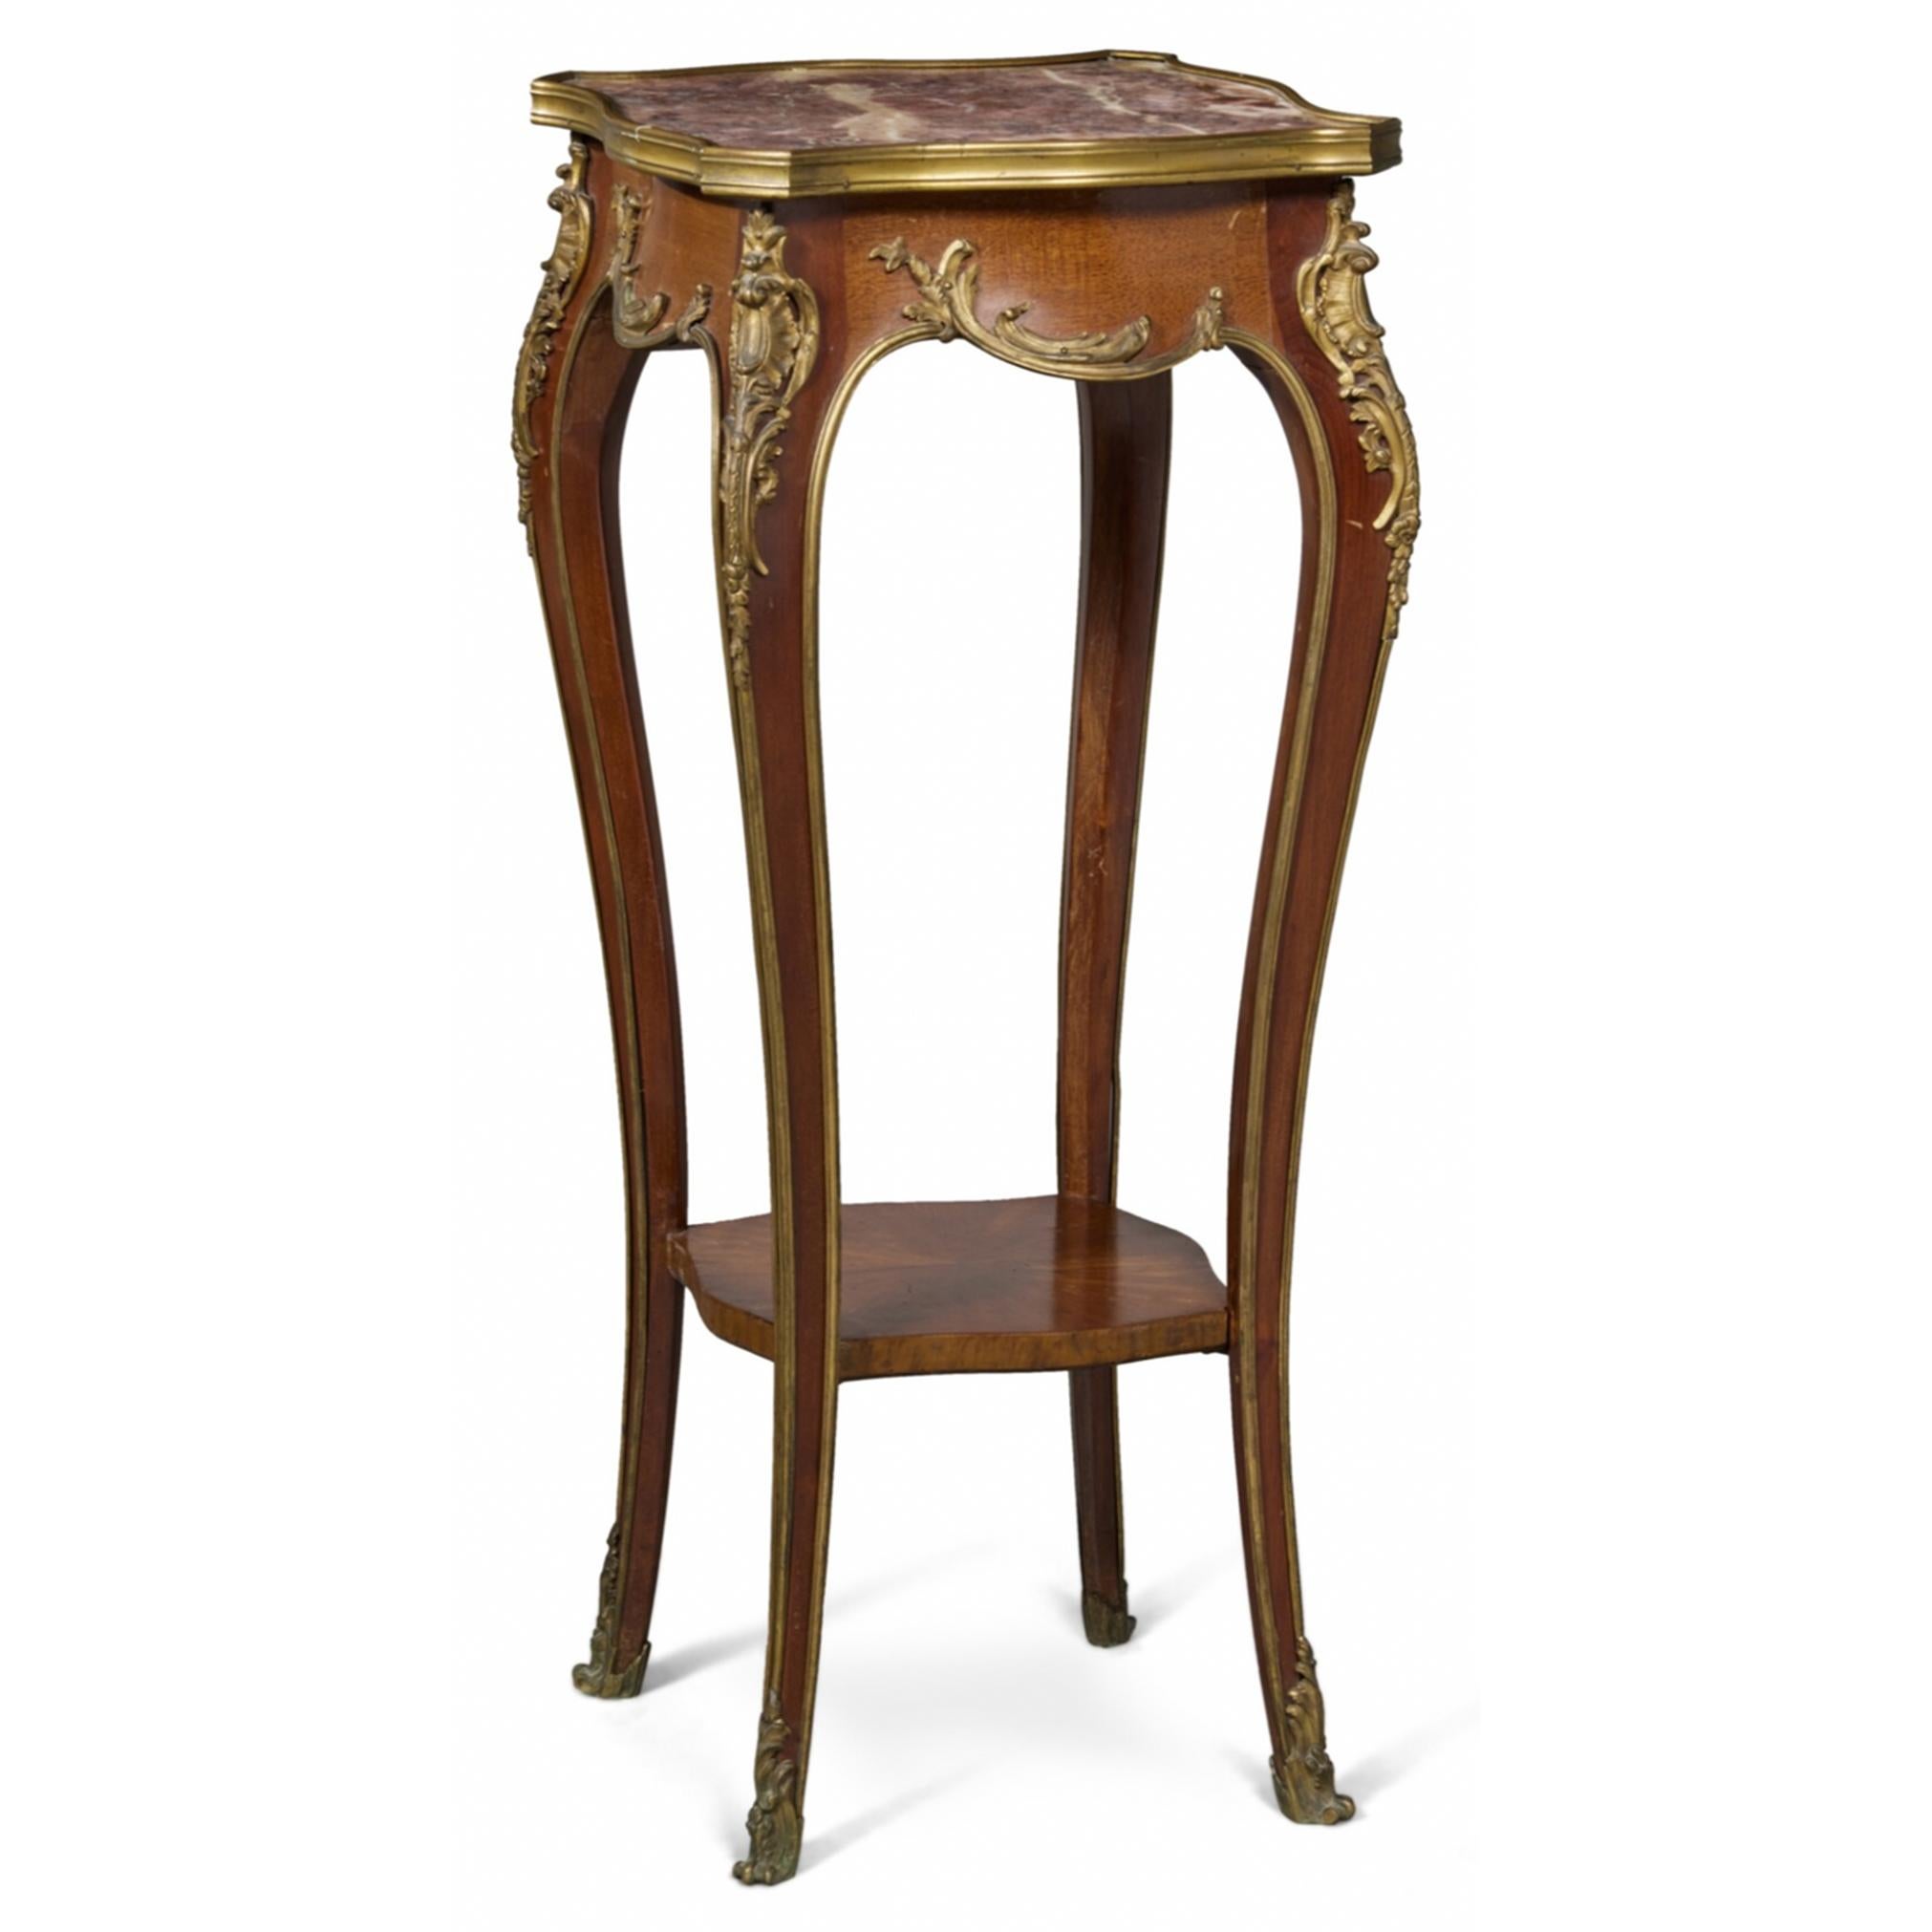 This fabulous Gervais Durand mahogany side table with square Fleur de Pêcher marble top is quite unique, standing out amongst other similar side tables of the period with more streamlined garniture and square top. 
stamped G. Durand, with a Fleur